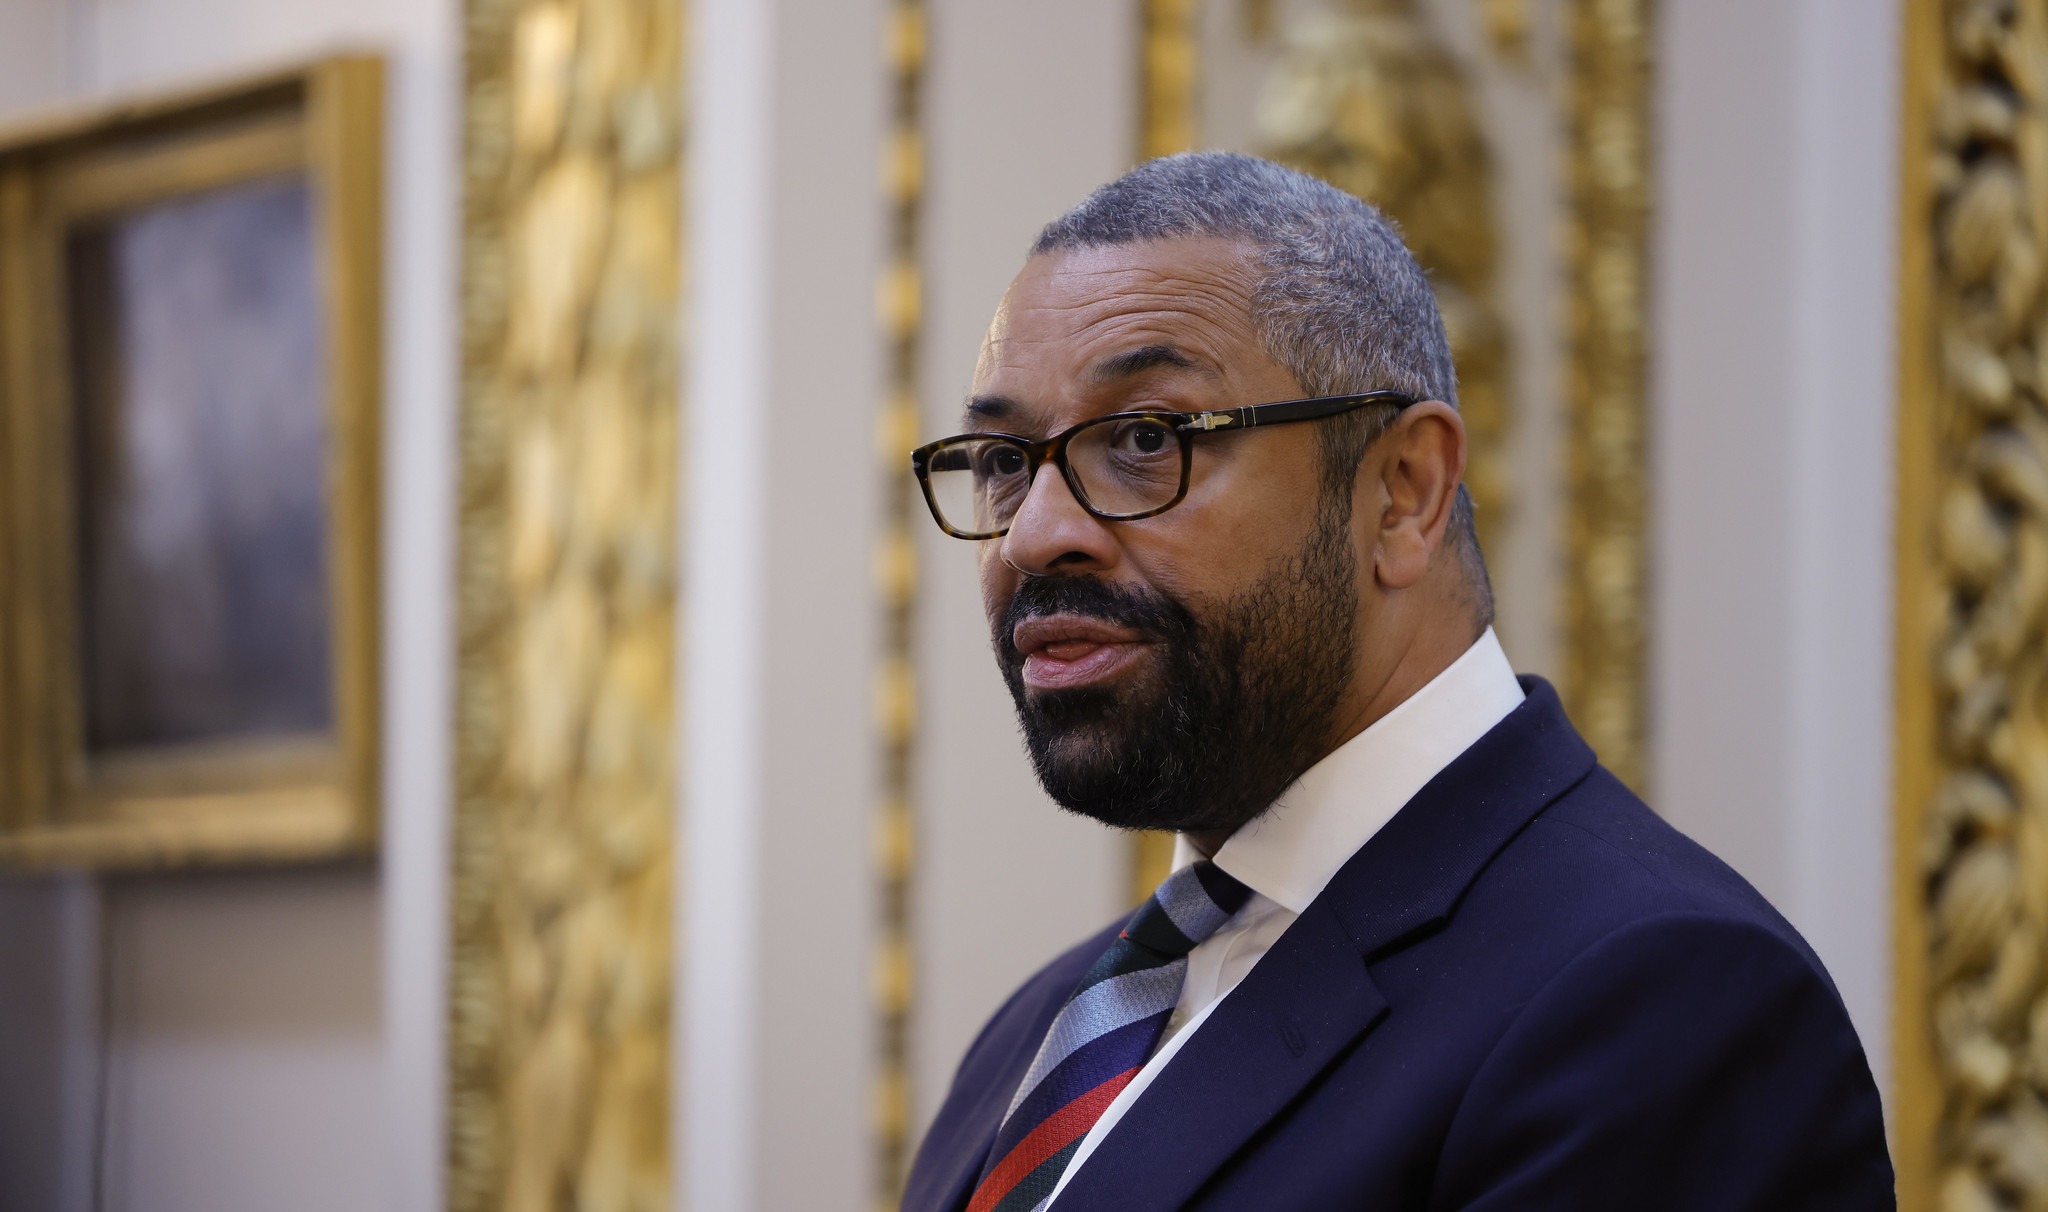 James Cleverly: The UK’s dictatorships man